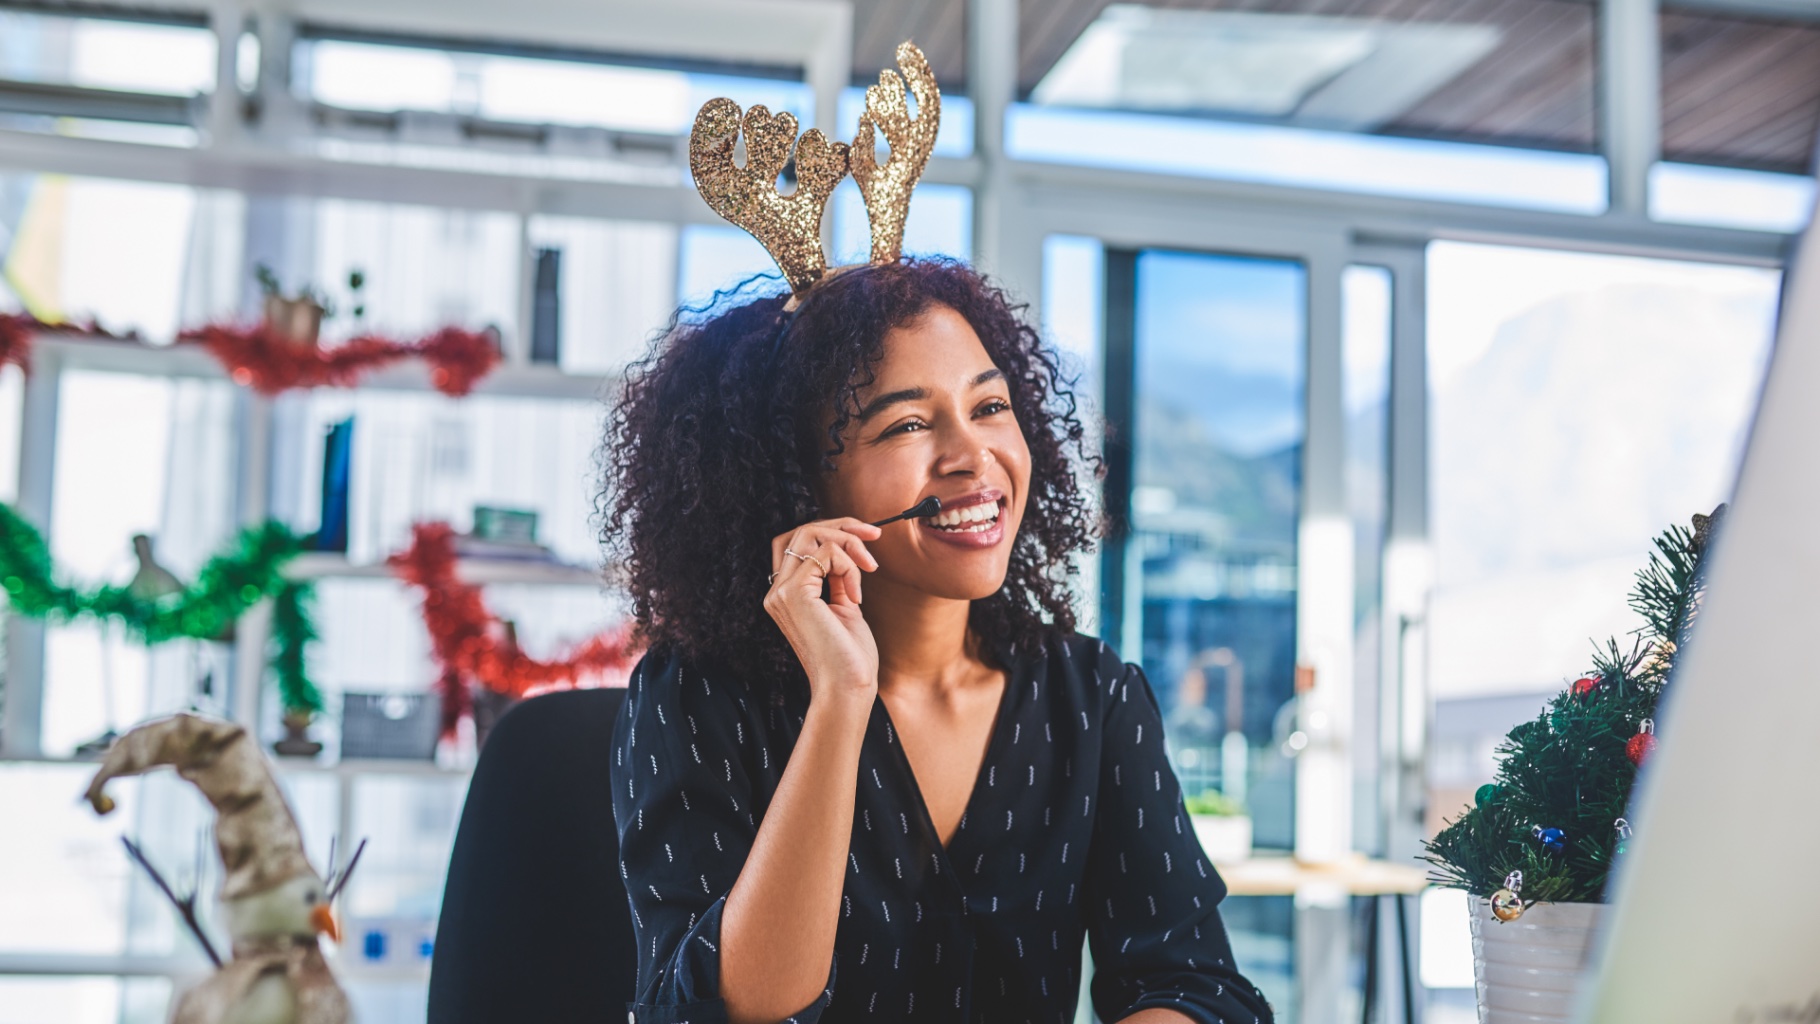 Contact center workforce management: Surviving the peak season surge with AI and more